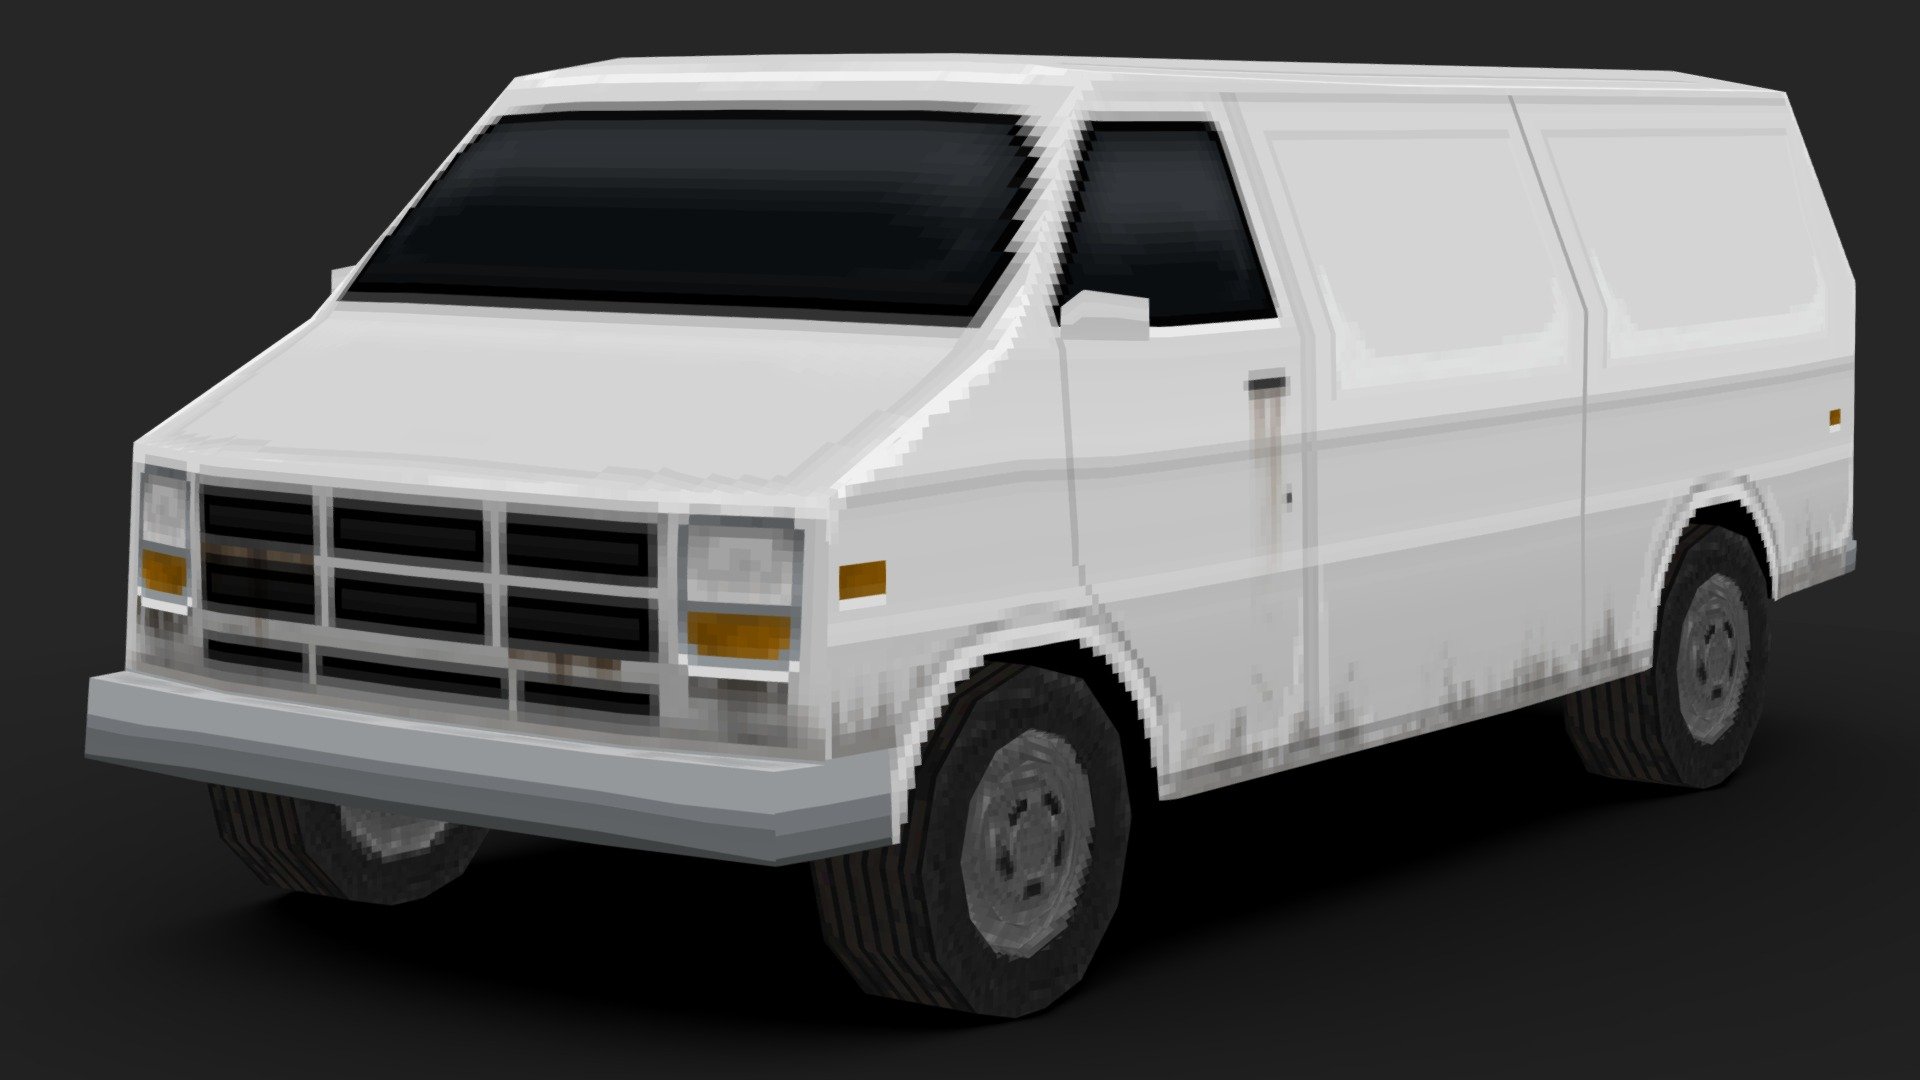 A kidnapper van in PS1/PSX Style graphics for your projects.

Textures are 256x256 3d model